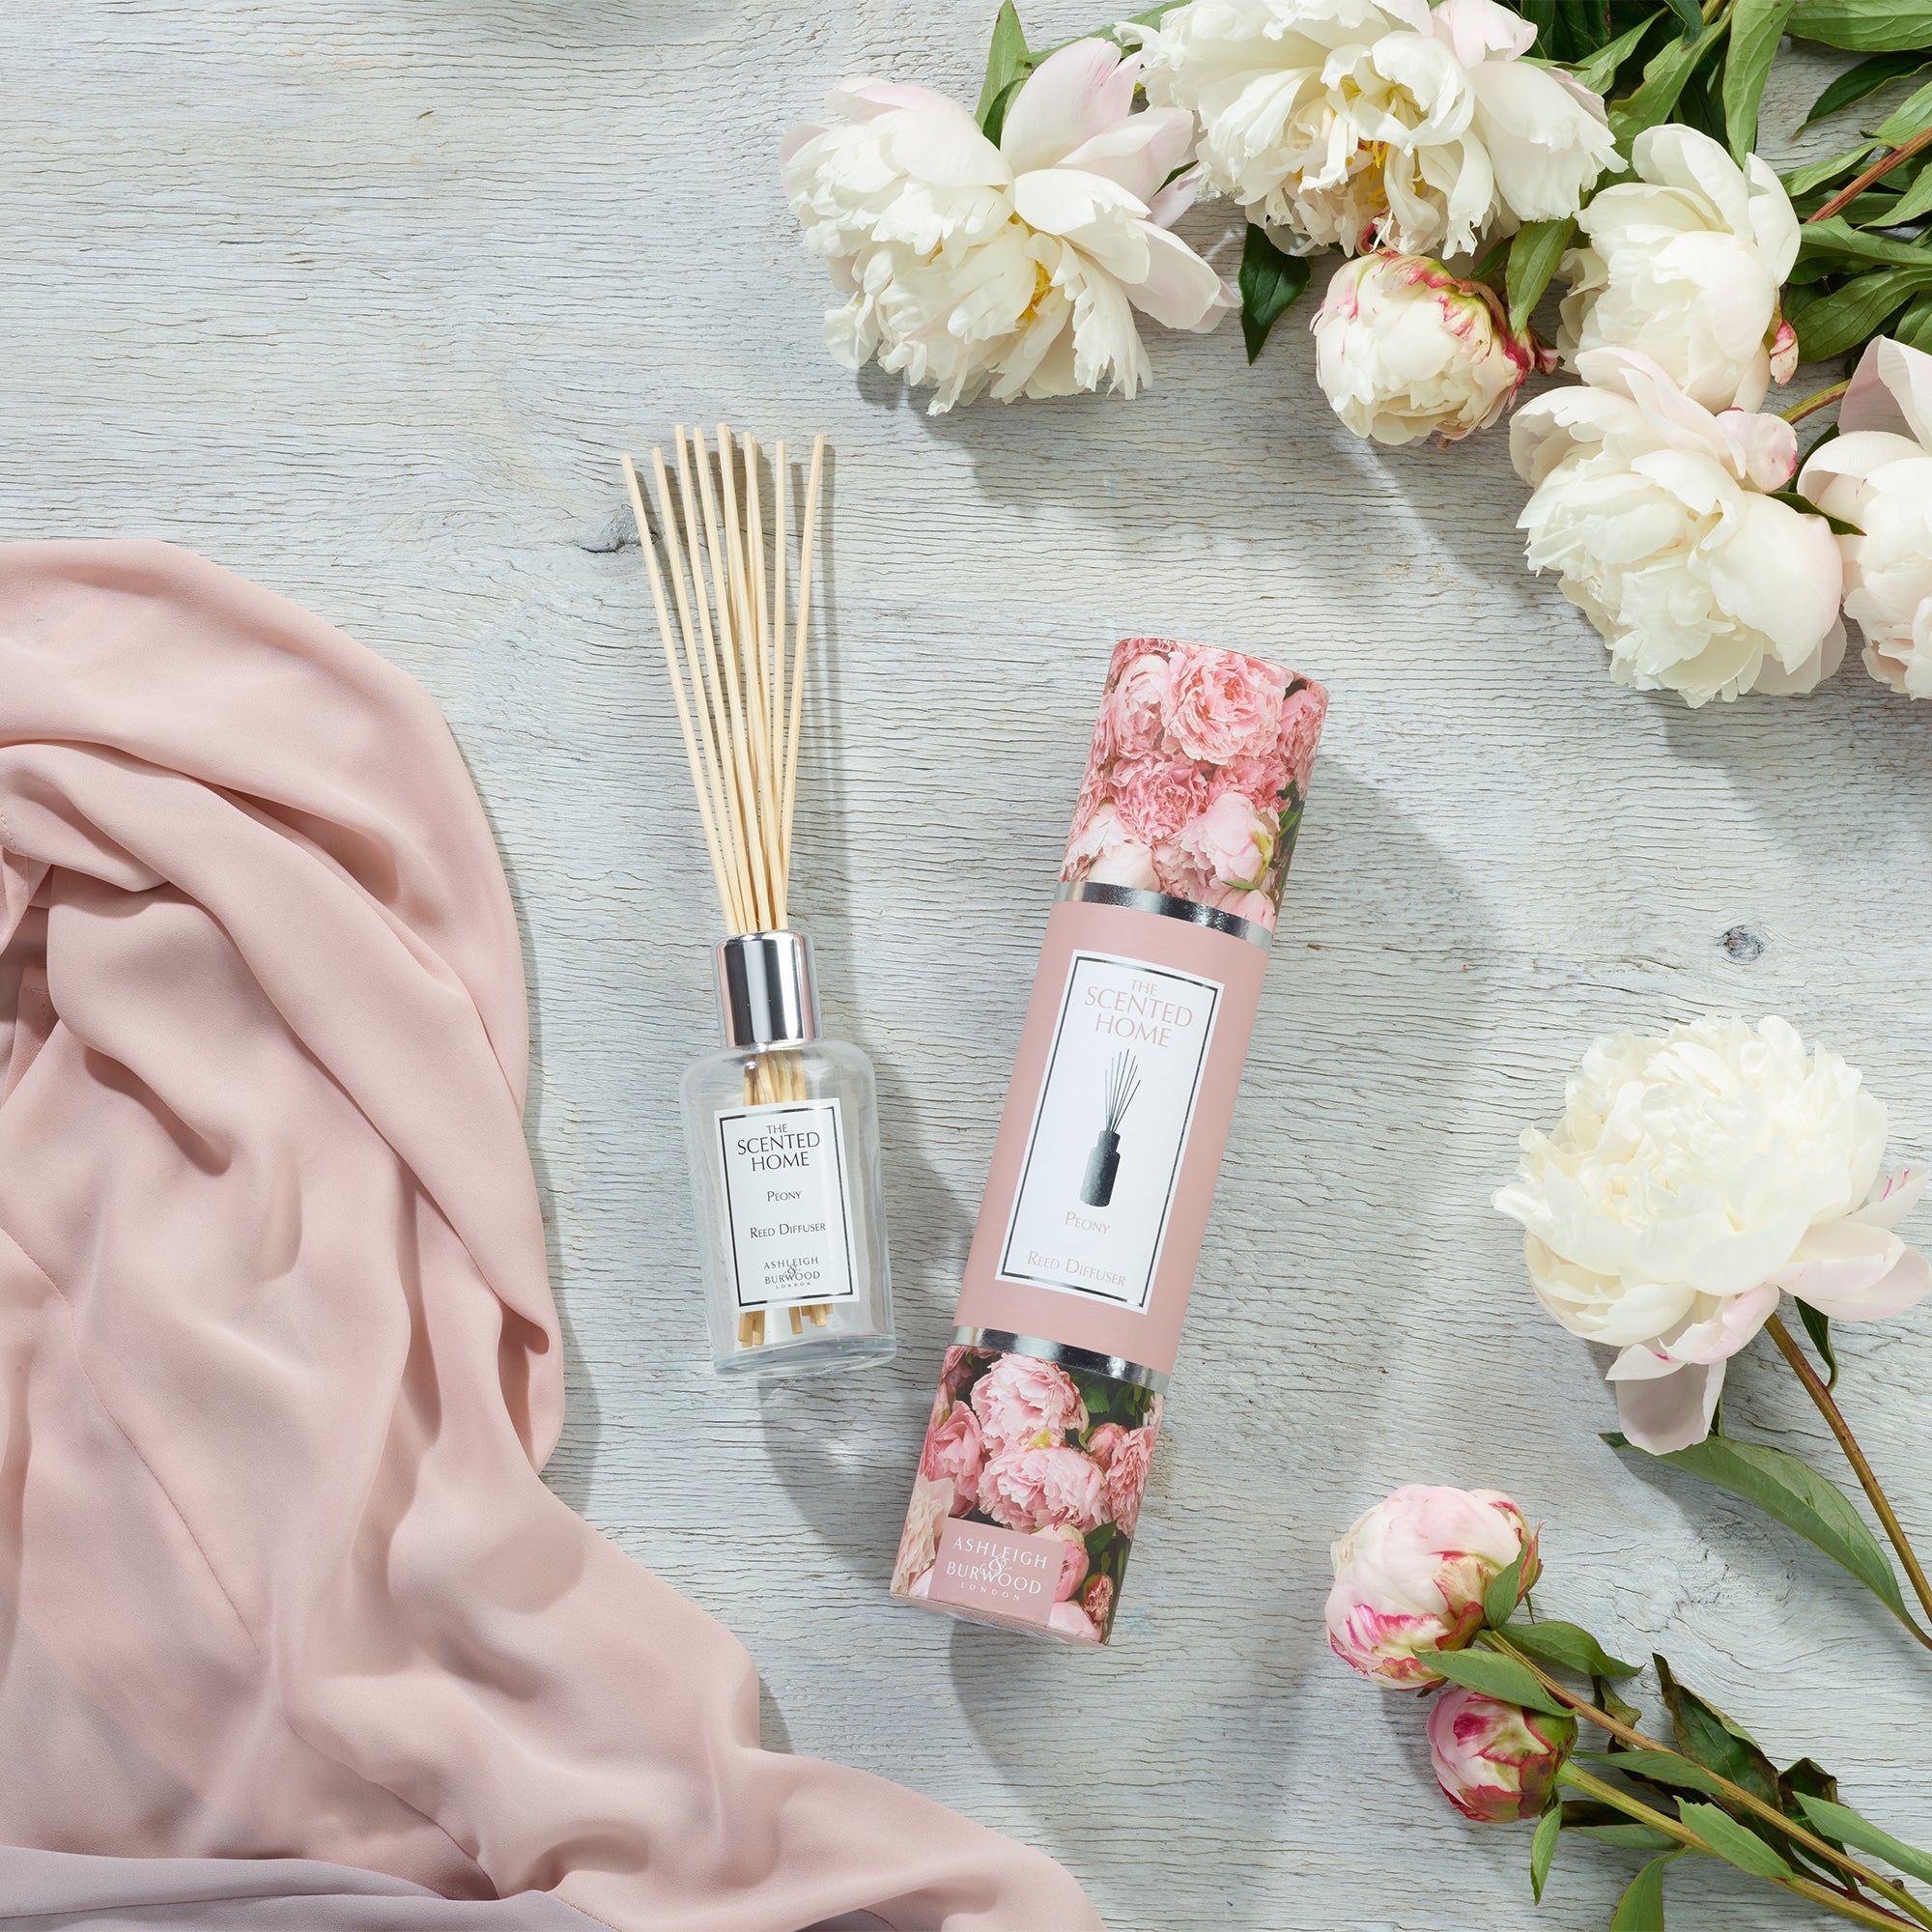 The Scented Home Peony Diffuser